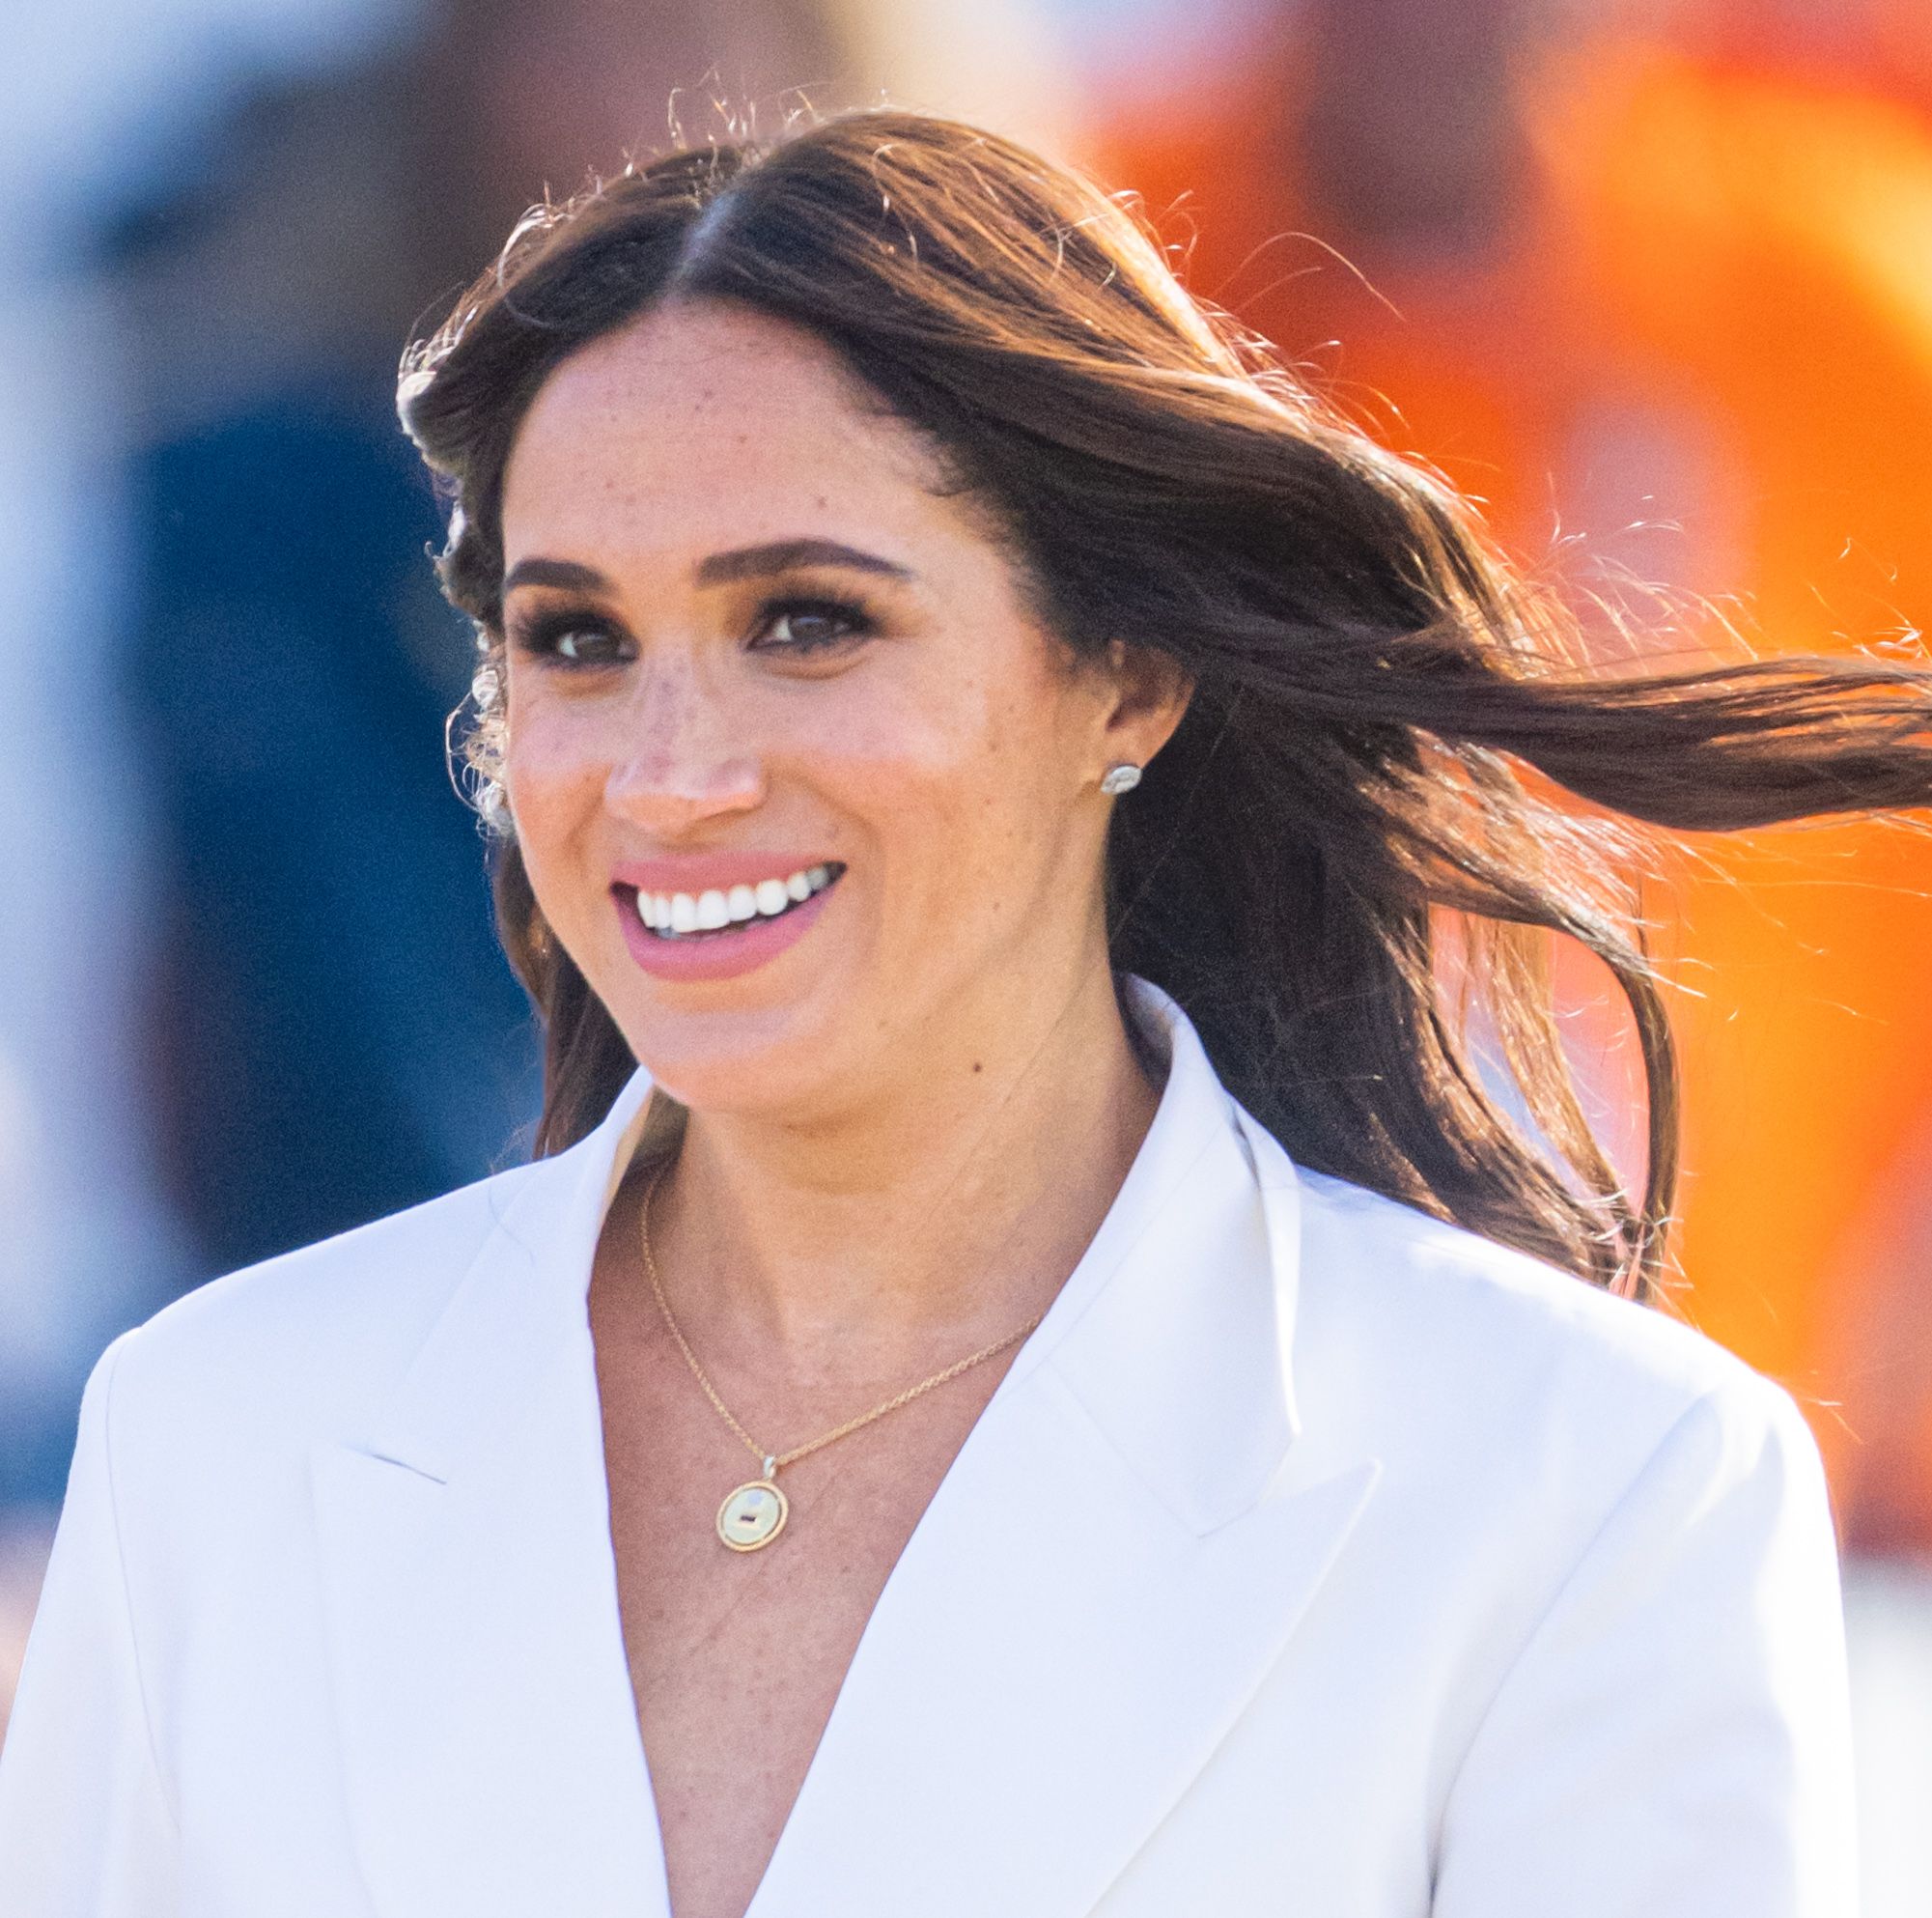 Insiders Give Another Crucial Reason for Why Meghan Markle Won't Be Attending King Charles's Coronation